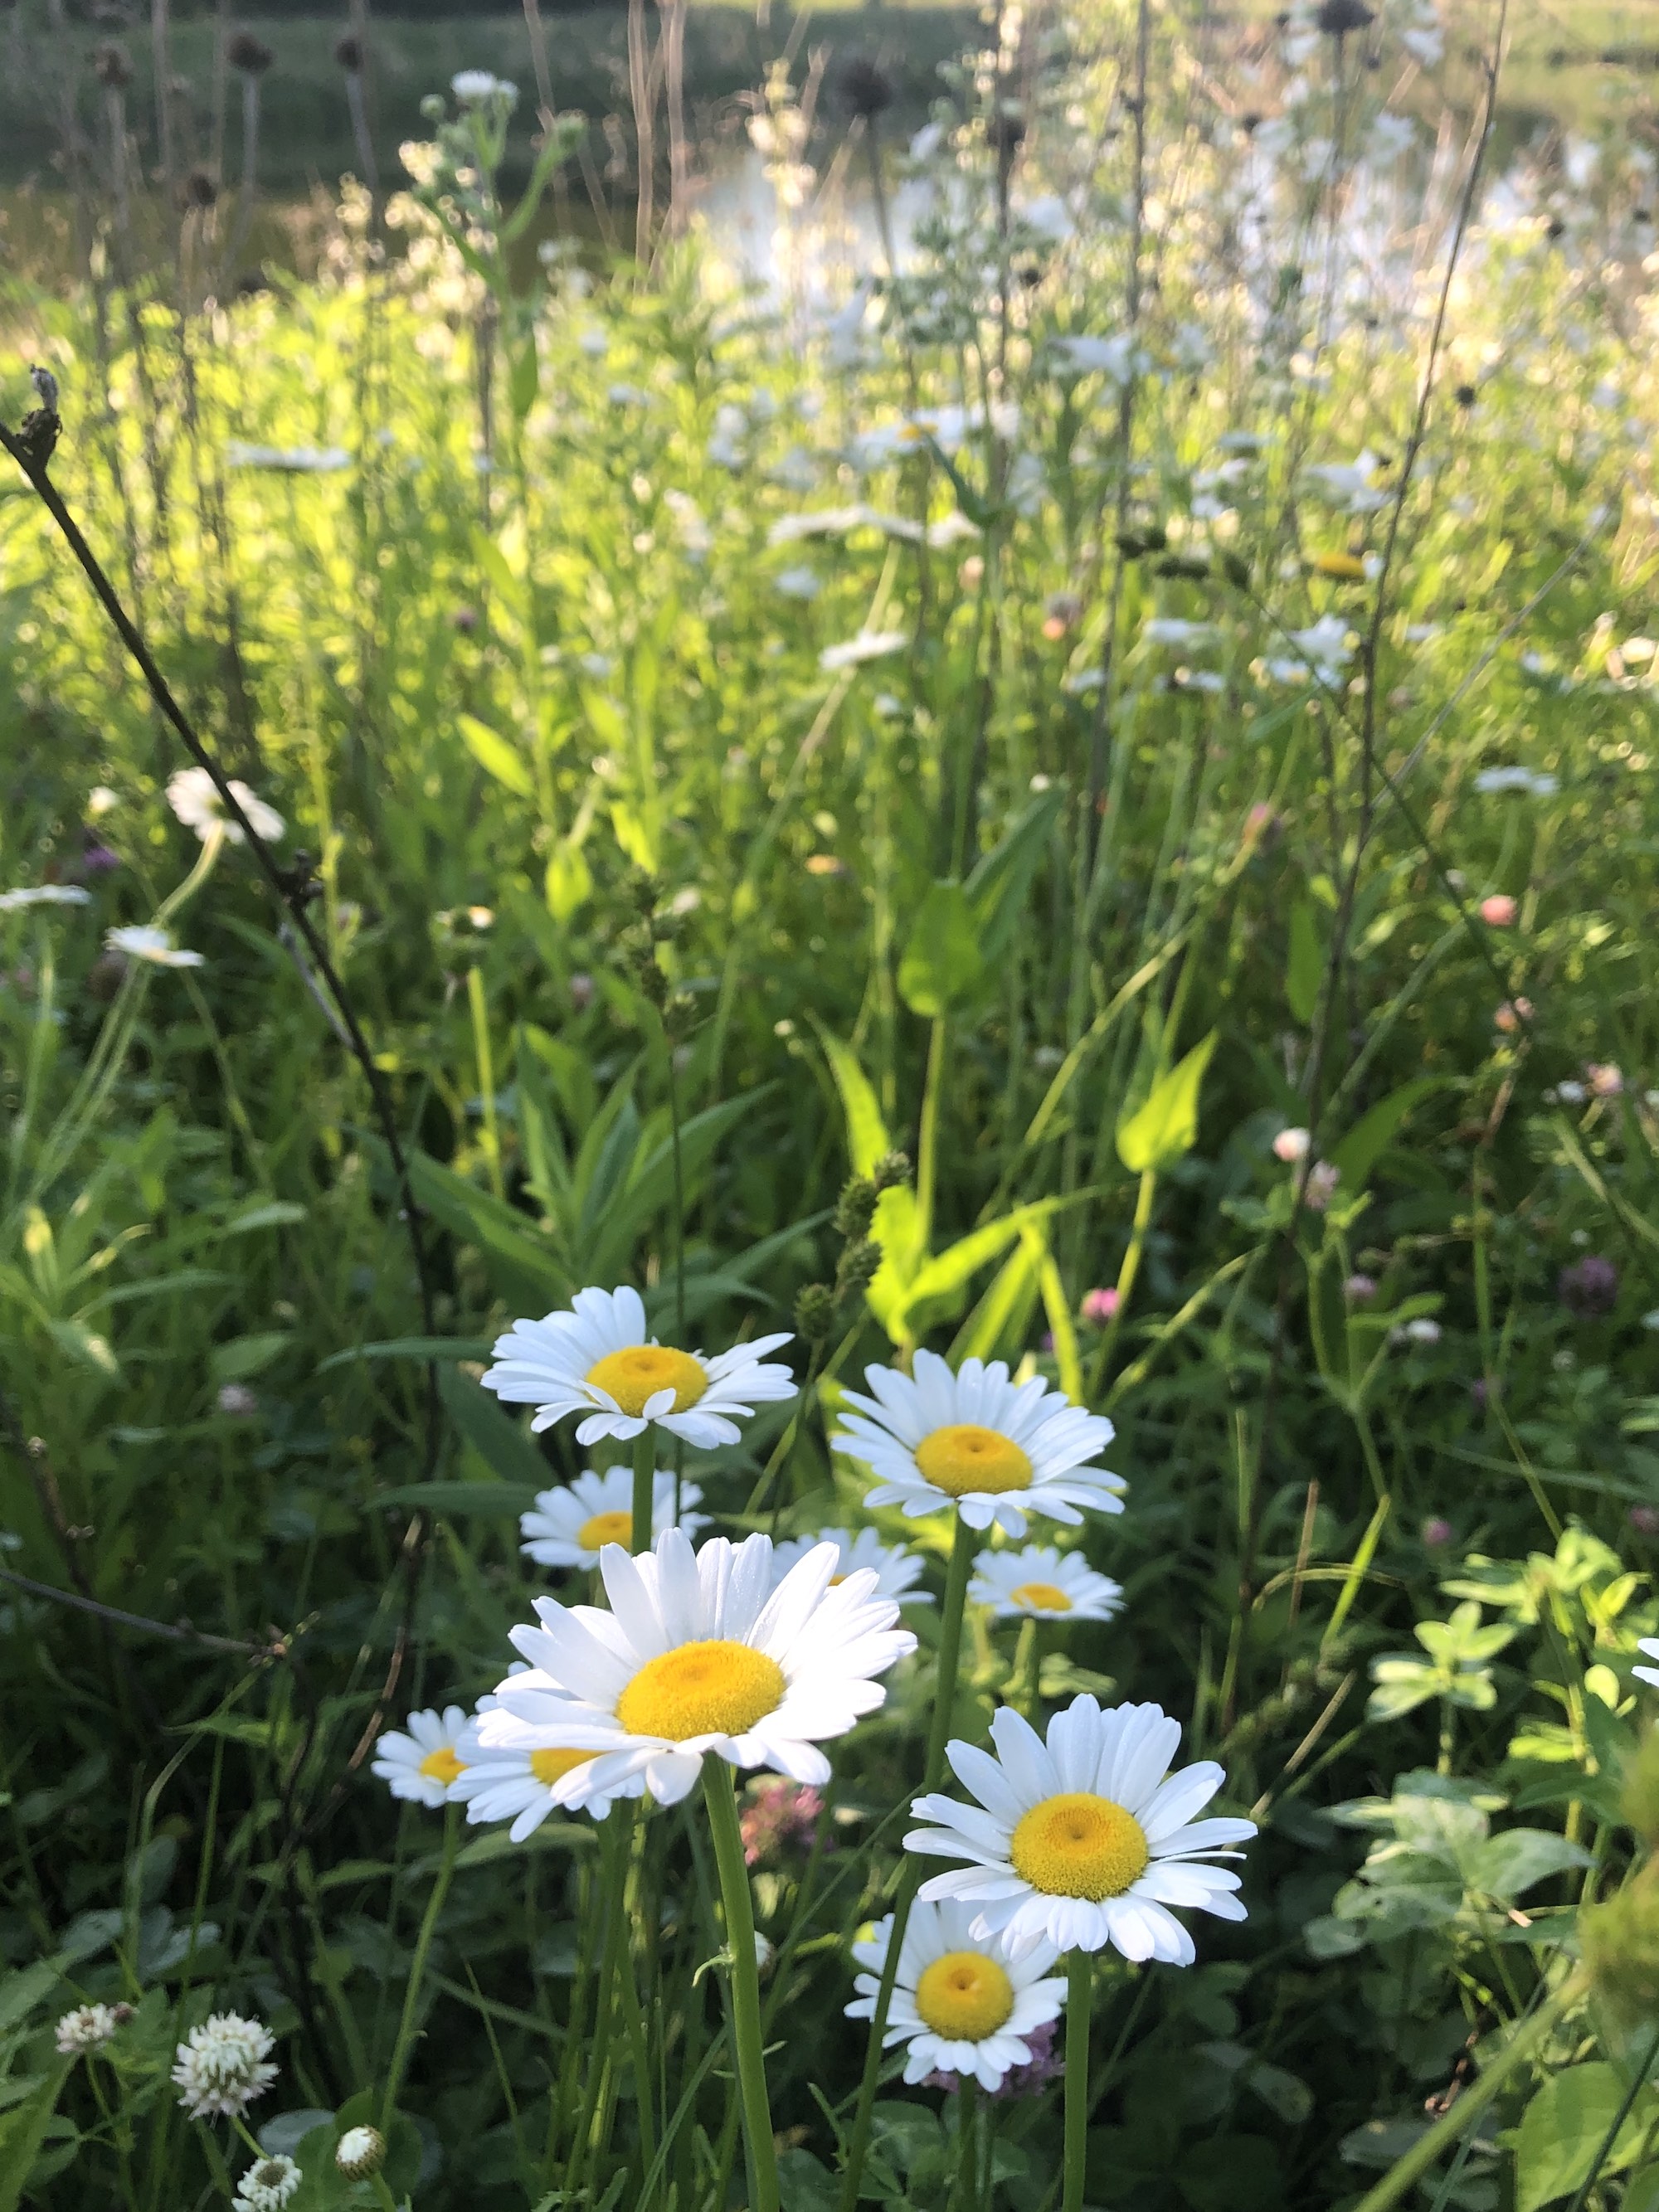 Ox-eye Daisies on bank of retaining pond in Madison, Wisconsin on June 12, 2020.